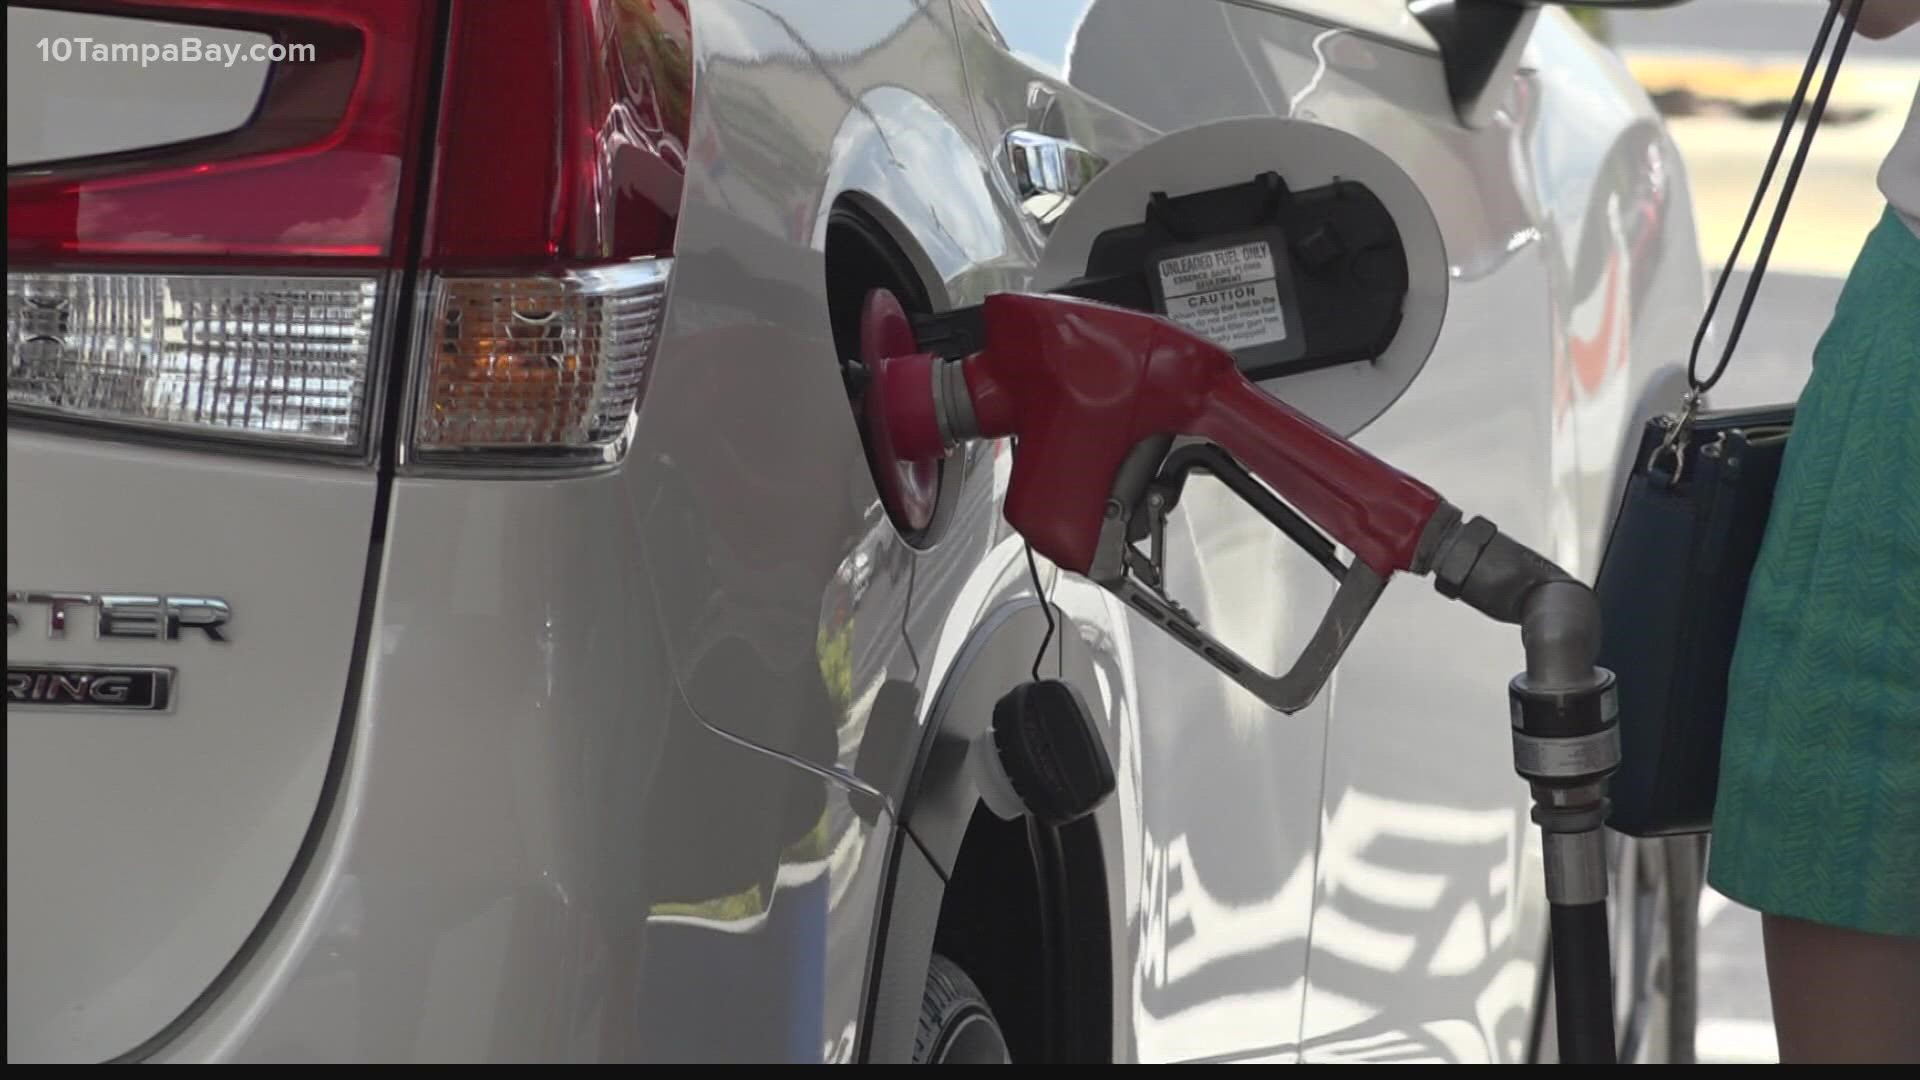 If passed by the Florida Legislature, Floridians would see a 25-cent decrease at the pump, the governor said.